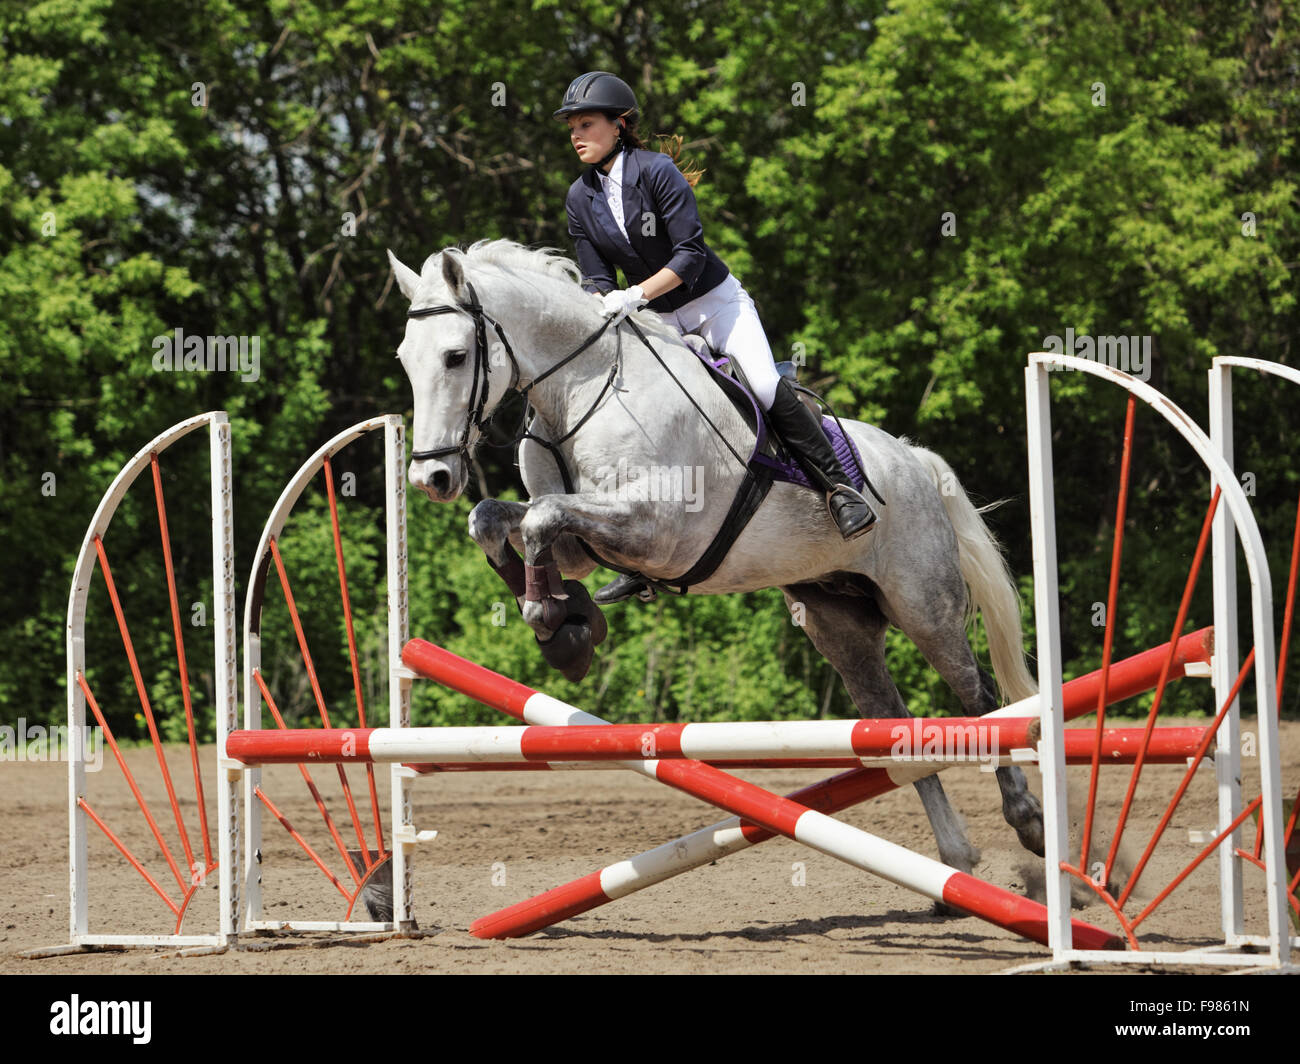 Equestrian jumper caught in mid jump with grass and white fences in the background Stock Photo